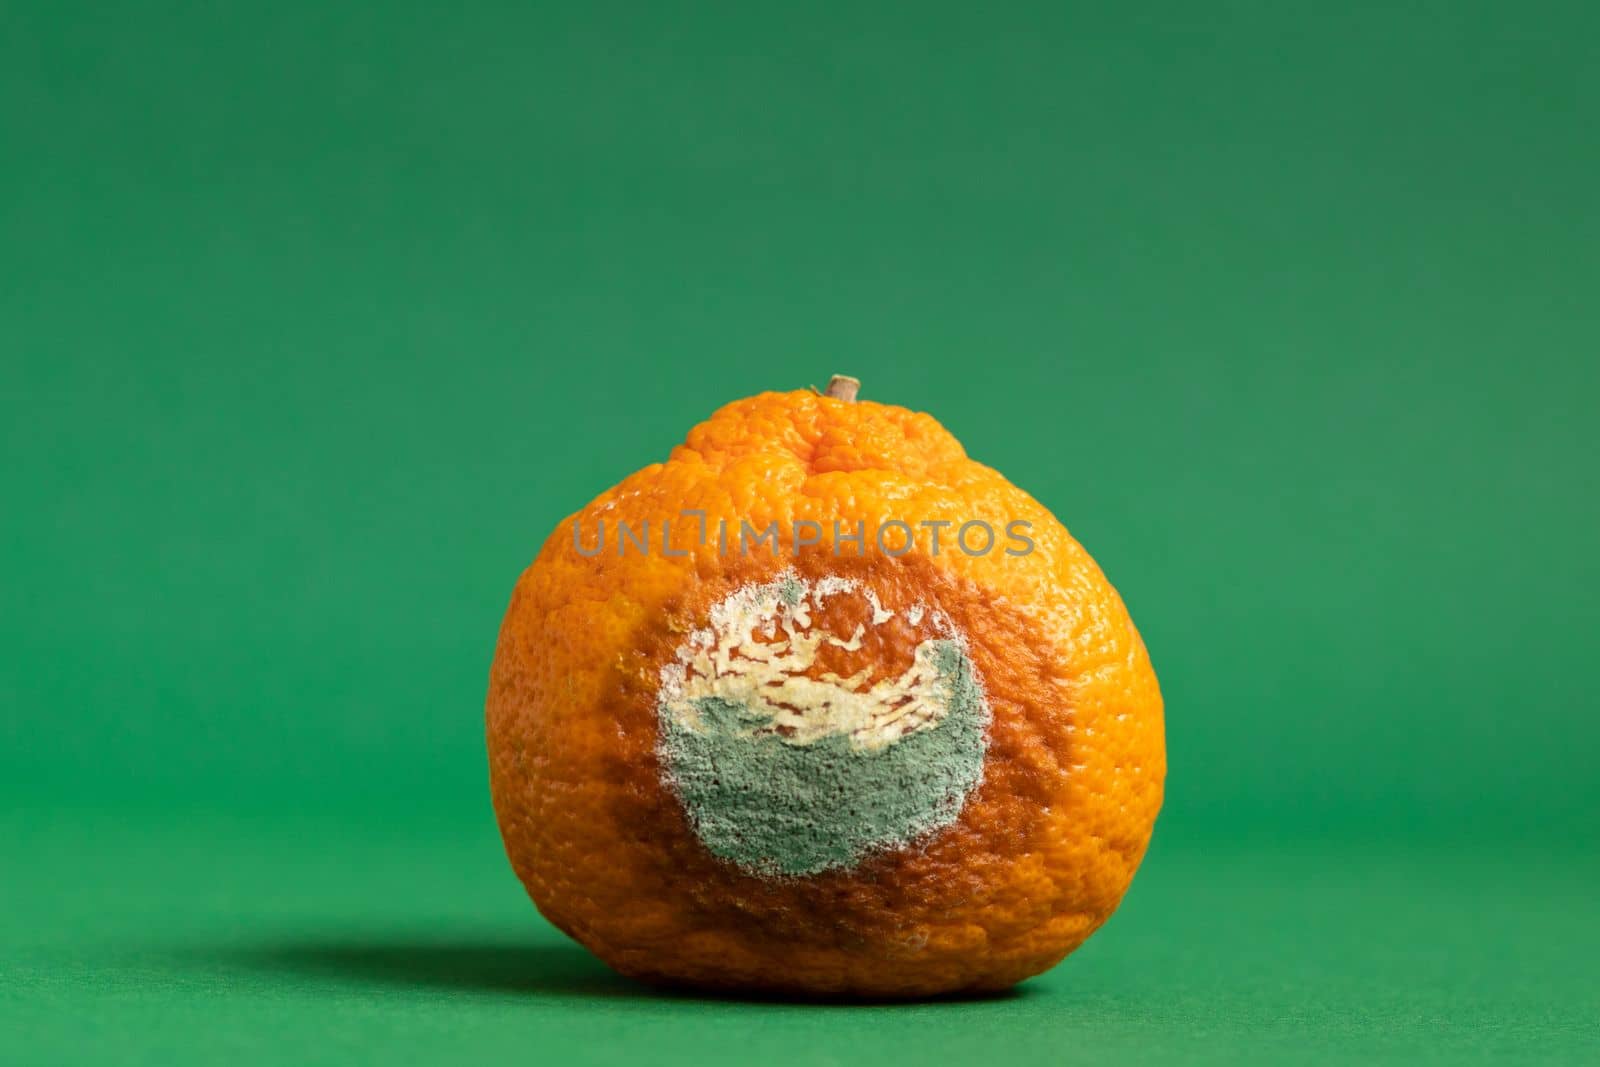 Concept of stop food waste day. Moldy orange. Rottan moldy fruit. Mould, mildew covered foods. Stop wasting food by Ri6ka